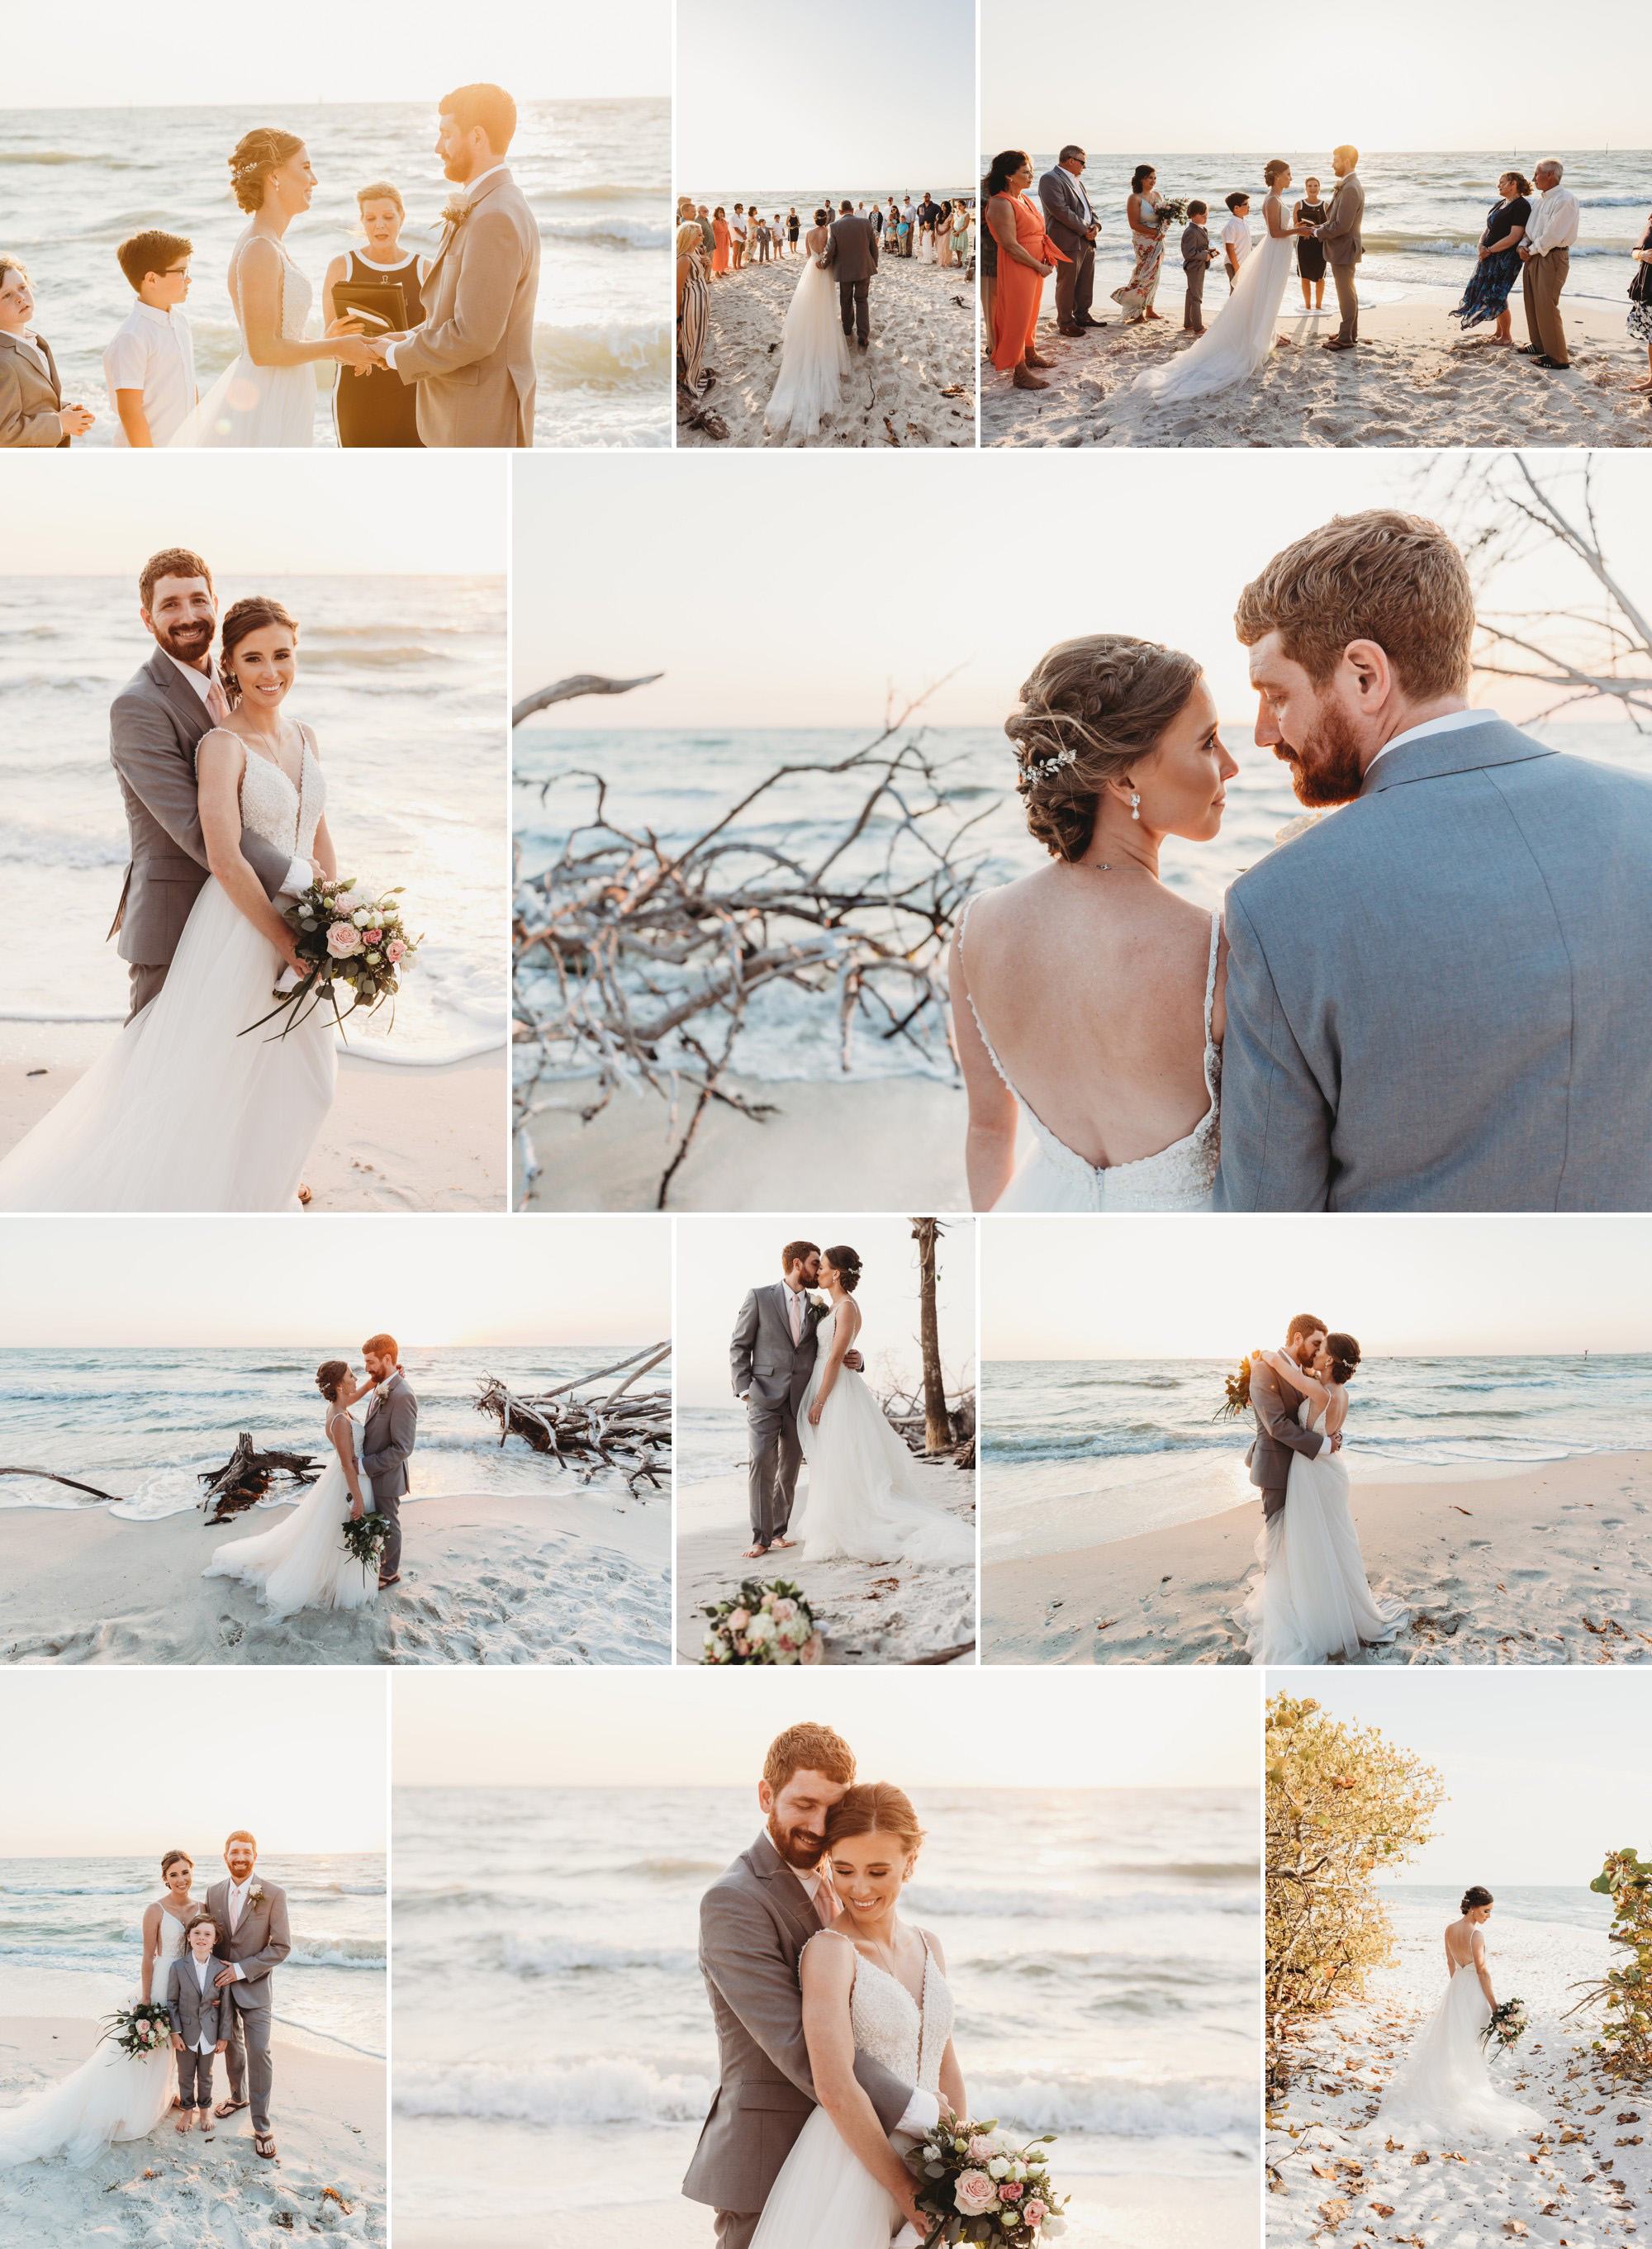 Elopement on the beach in Florida